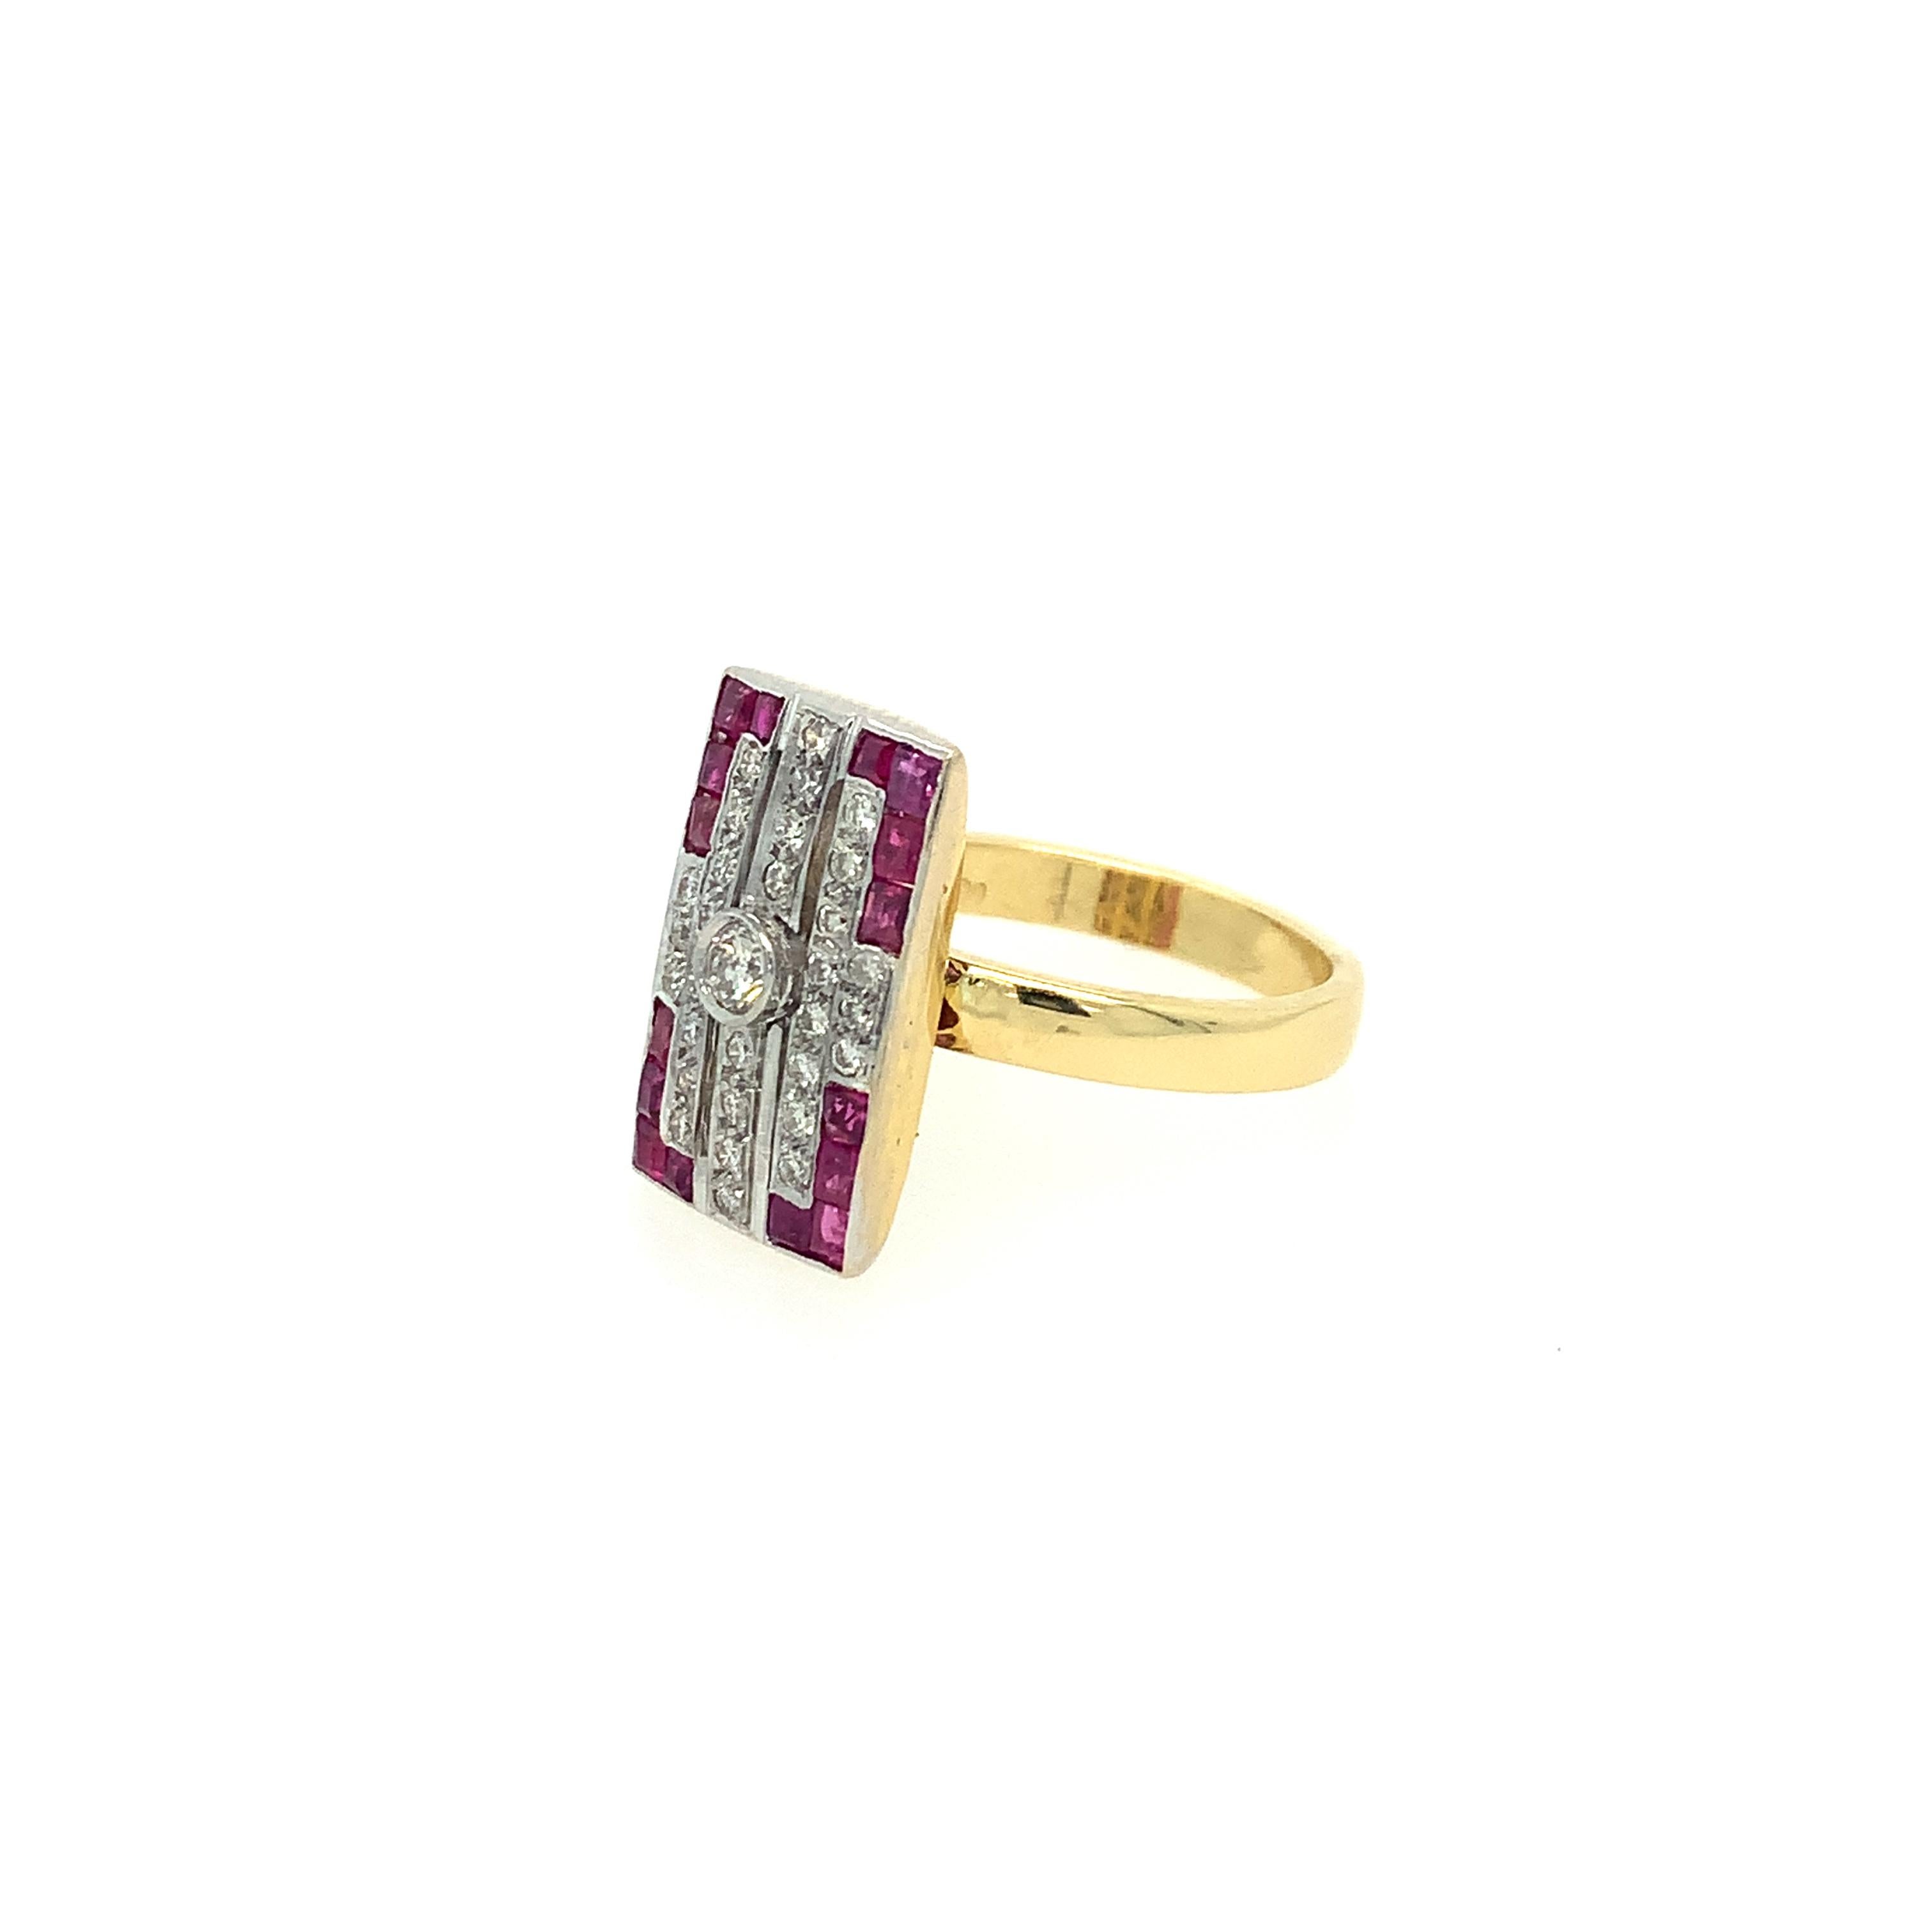 In the style of Art Deco, this 18K two tone ring is a showstopper. Featuring a vertically arranged combination of rubies and diamonds, this rare piece is framed by a beautiful and intricate geometric border of colorful gems. Centered by a round cut